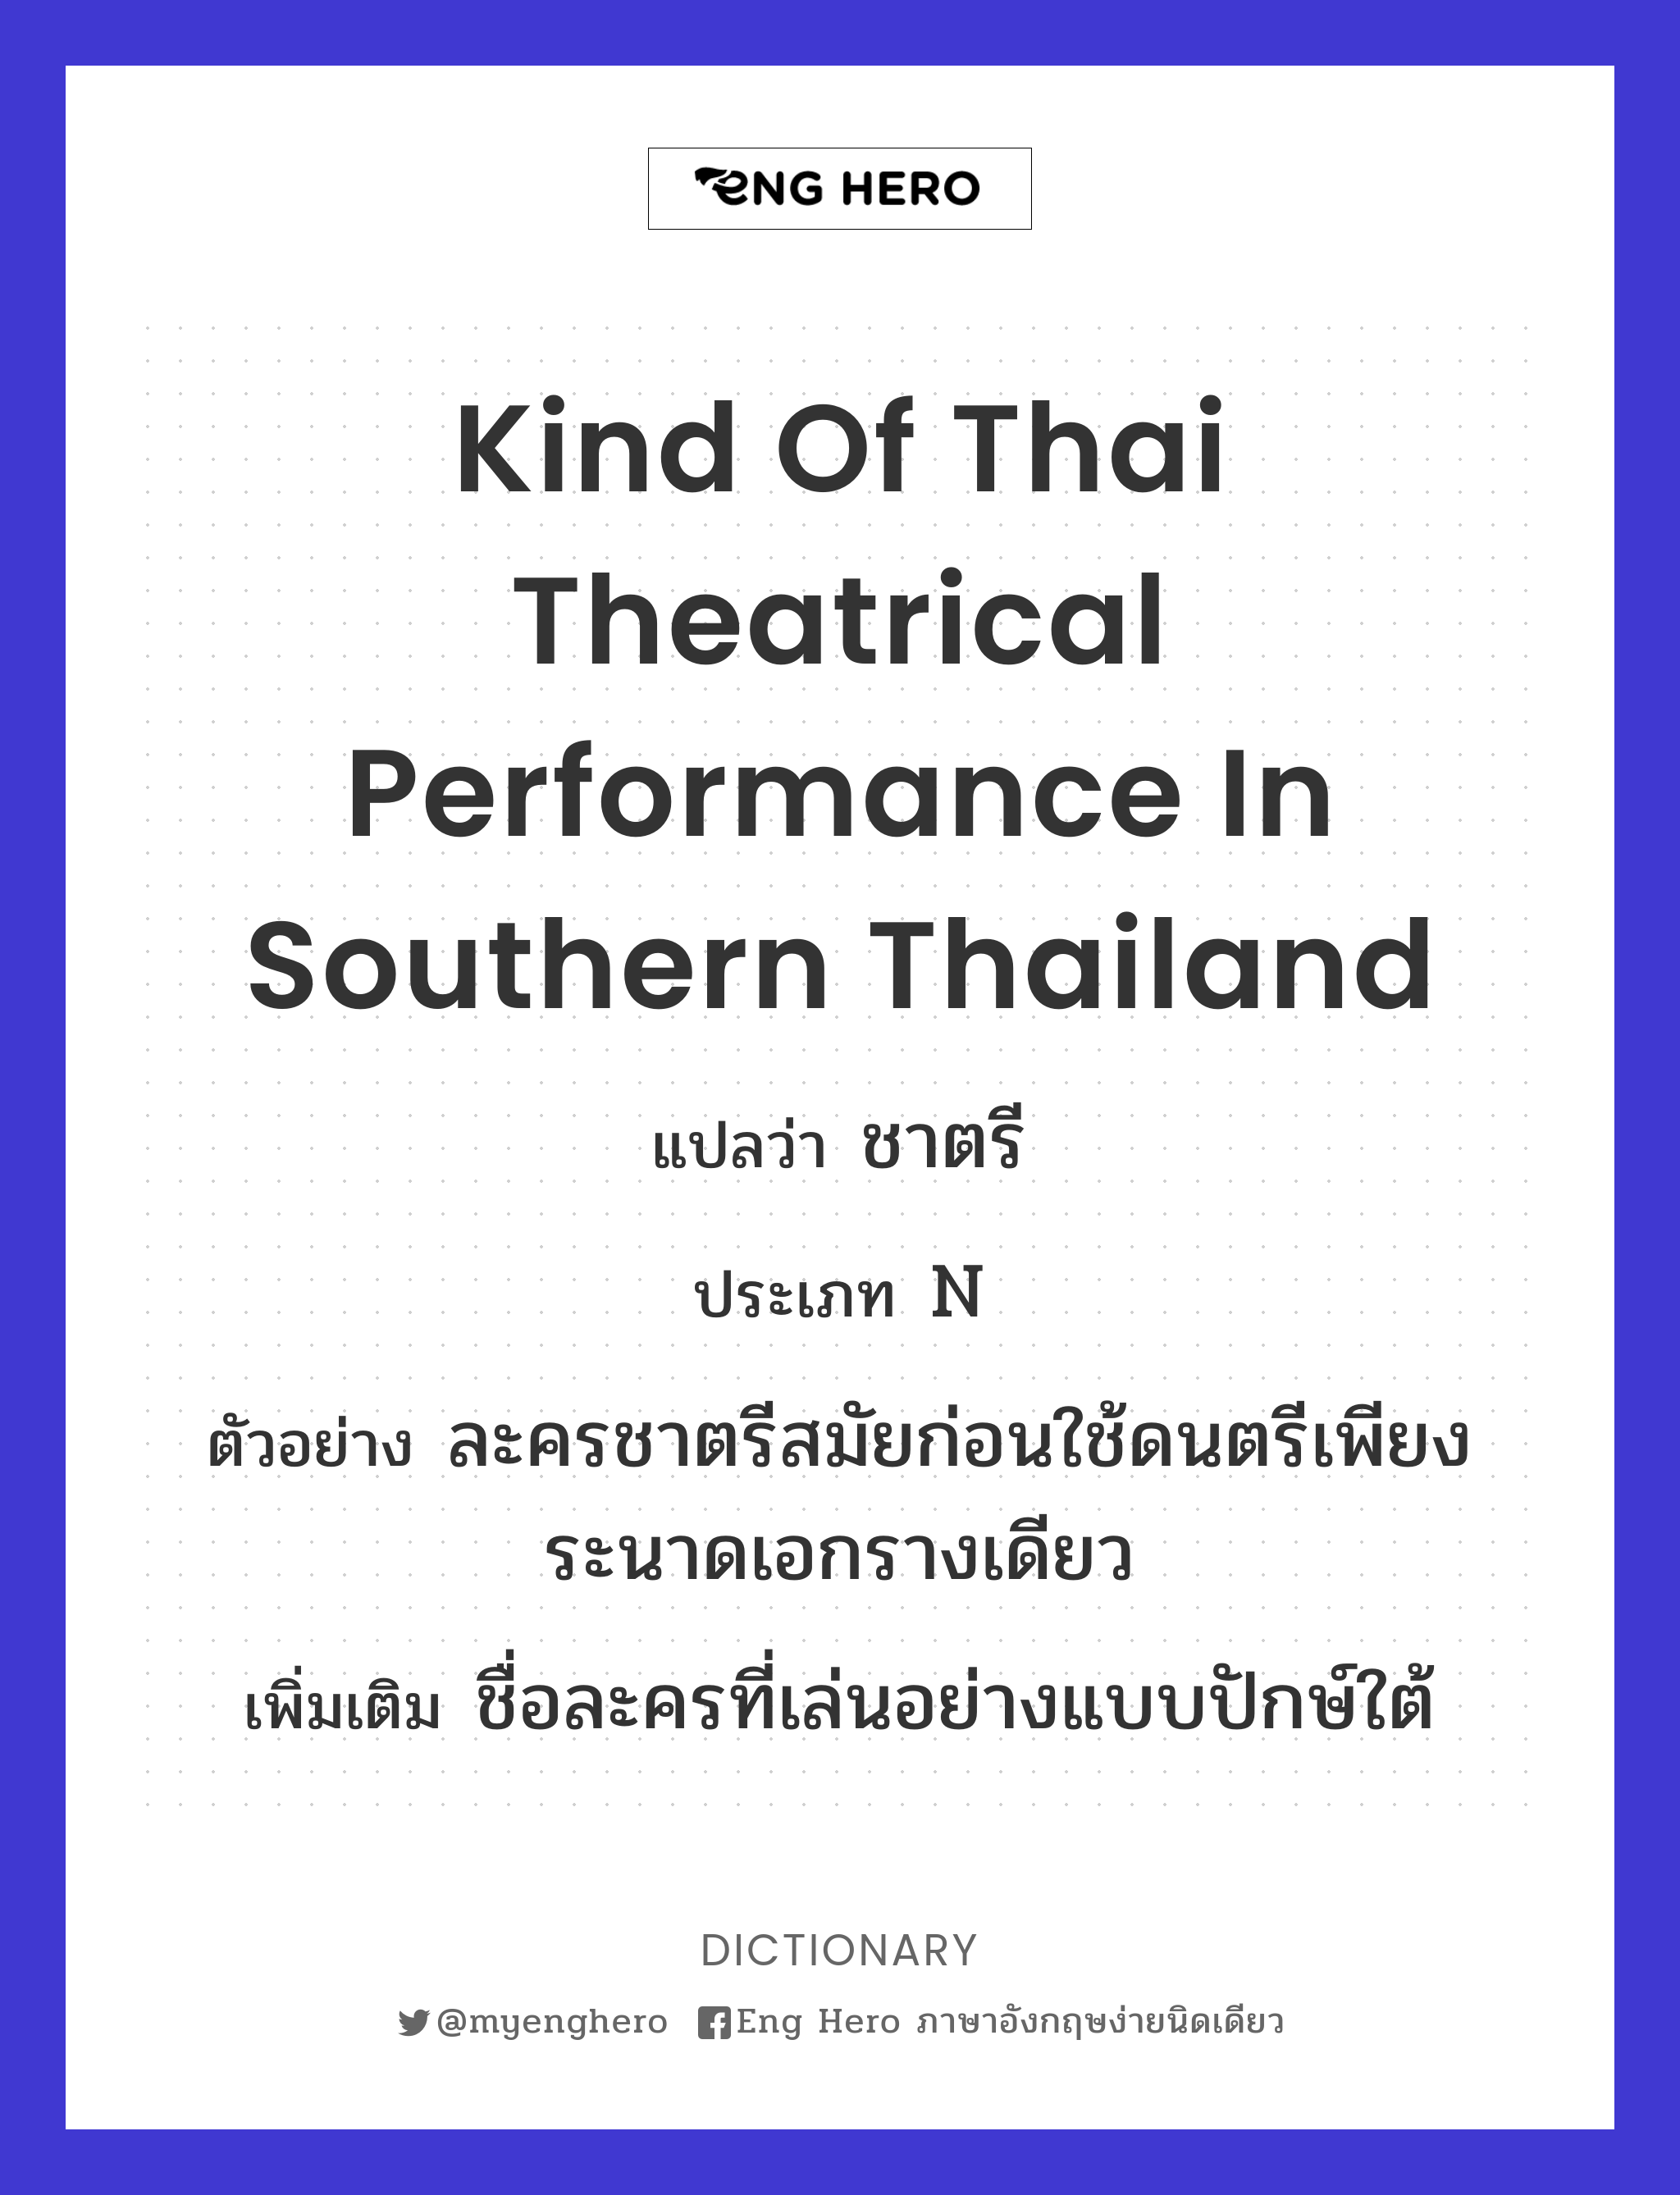 kind of Thai theatrical performance in southern Thailand